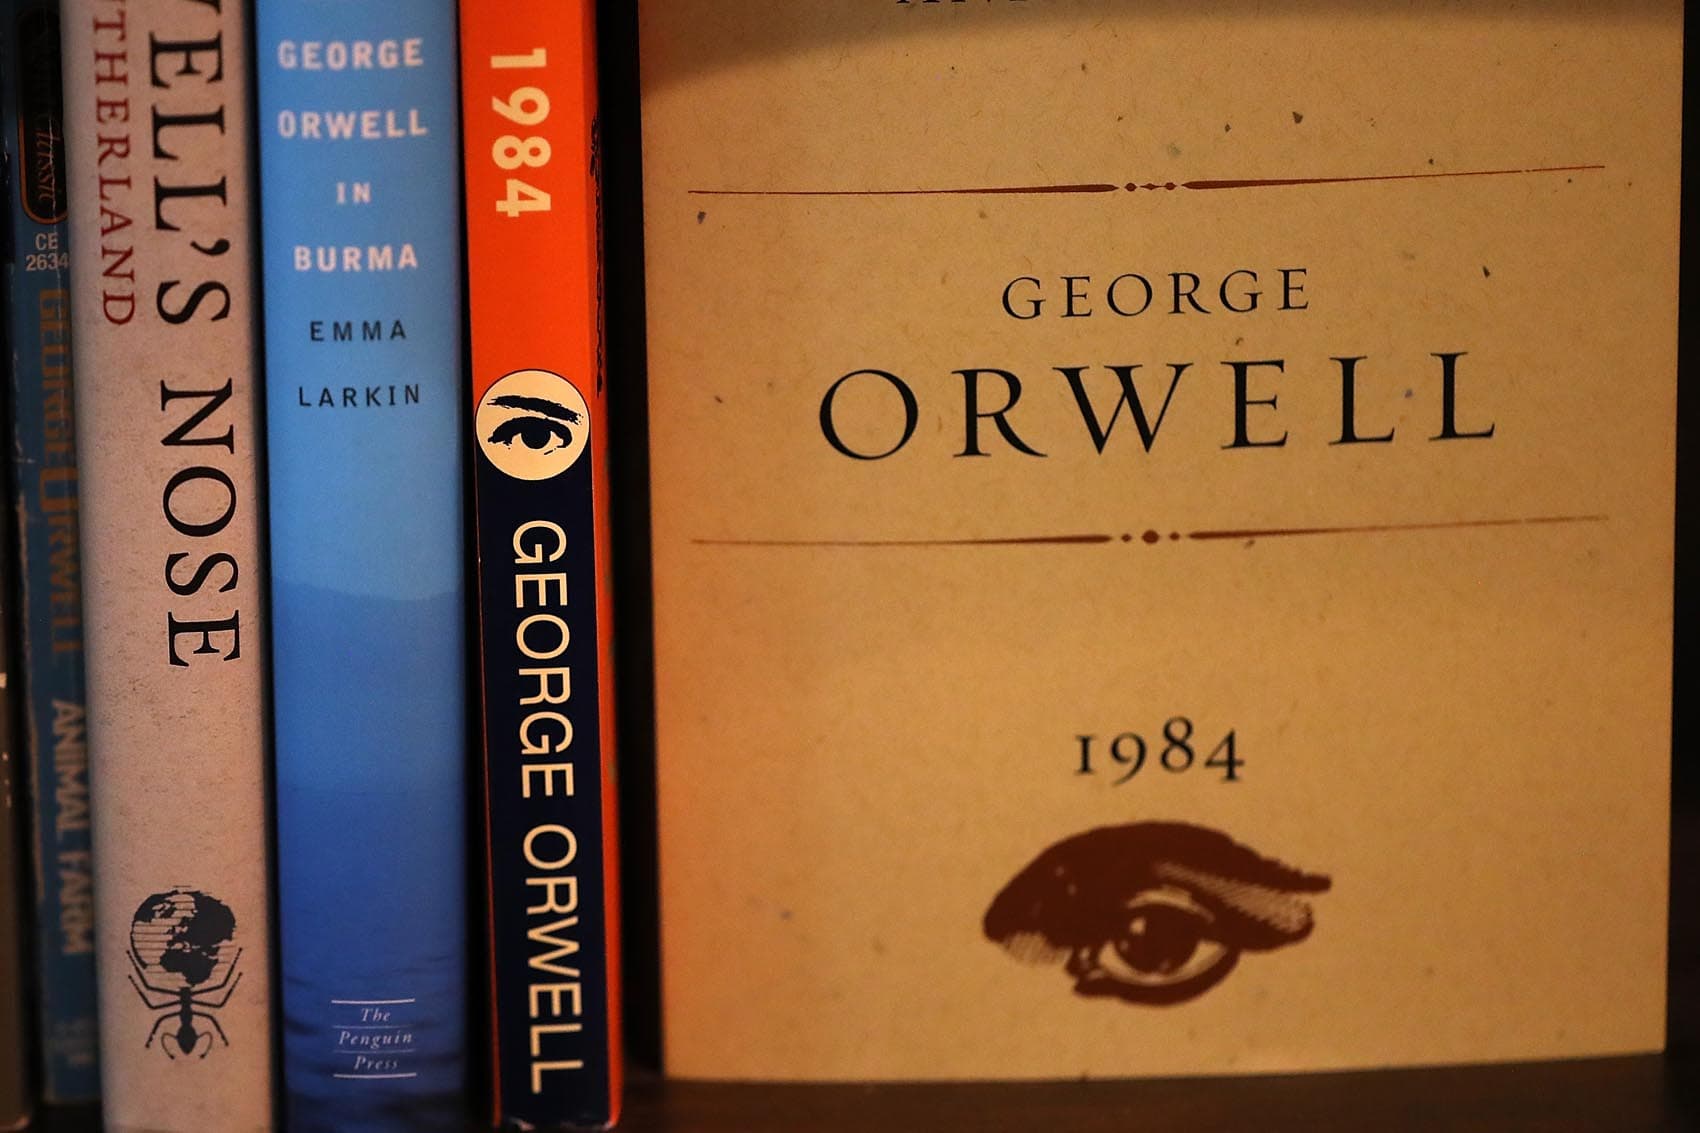 Nothing but the truth: the legacy of George Orwell's Nineteen Eighty-Four, George  Orwell